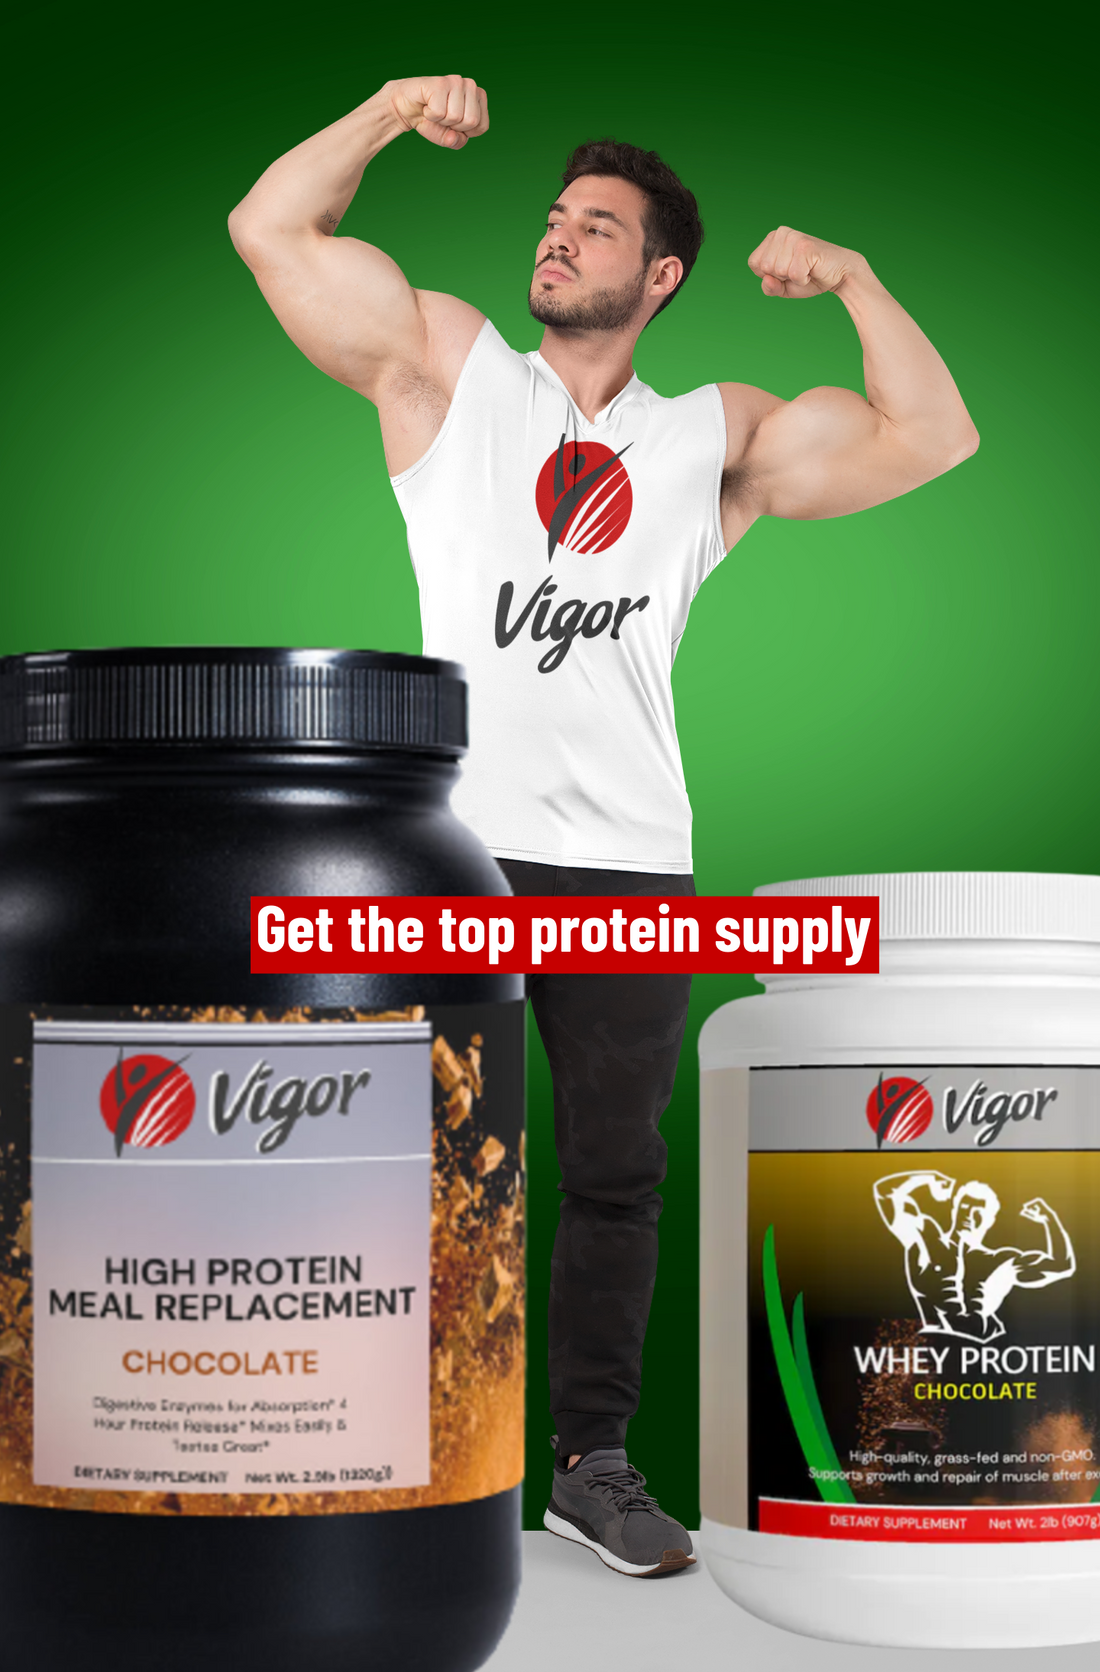 Vigor | Buy proteins with Vigor Youth Icon for quality and performance